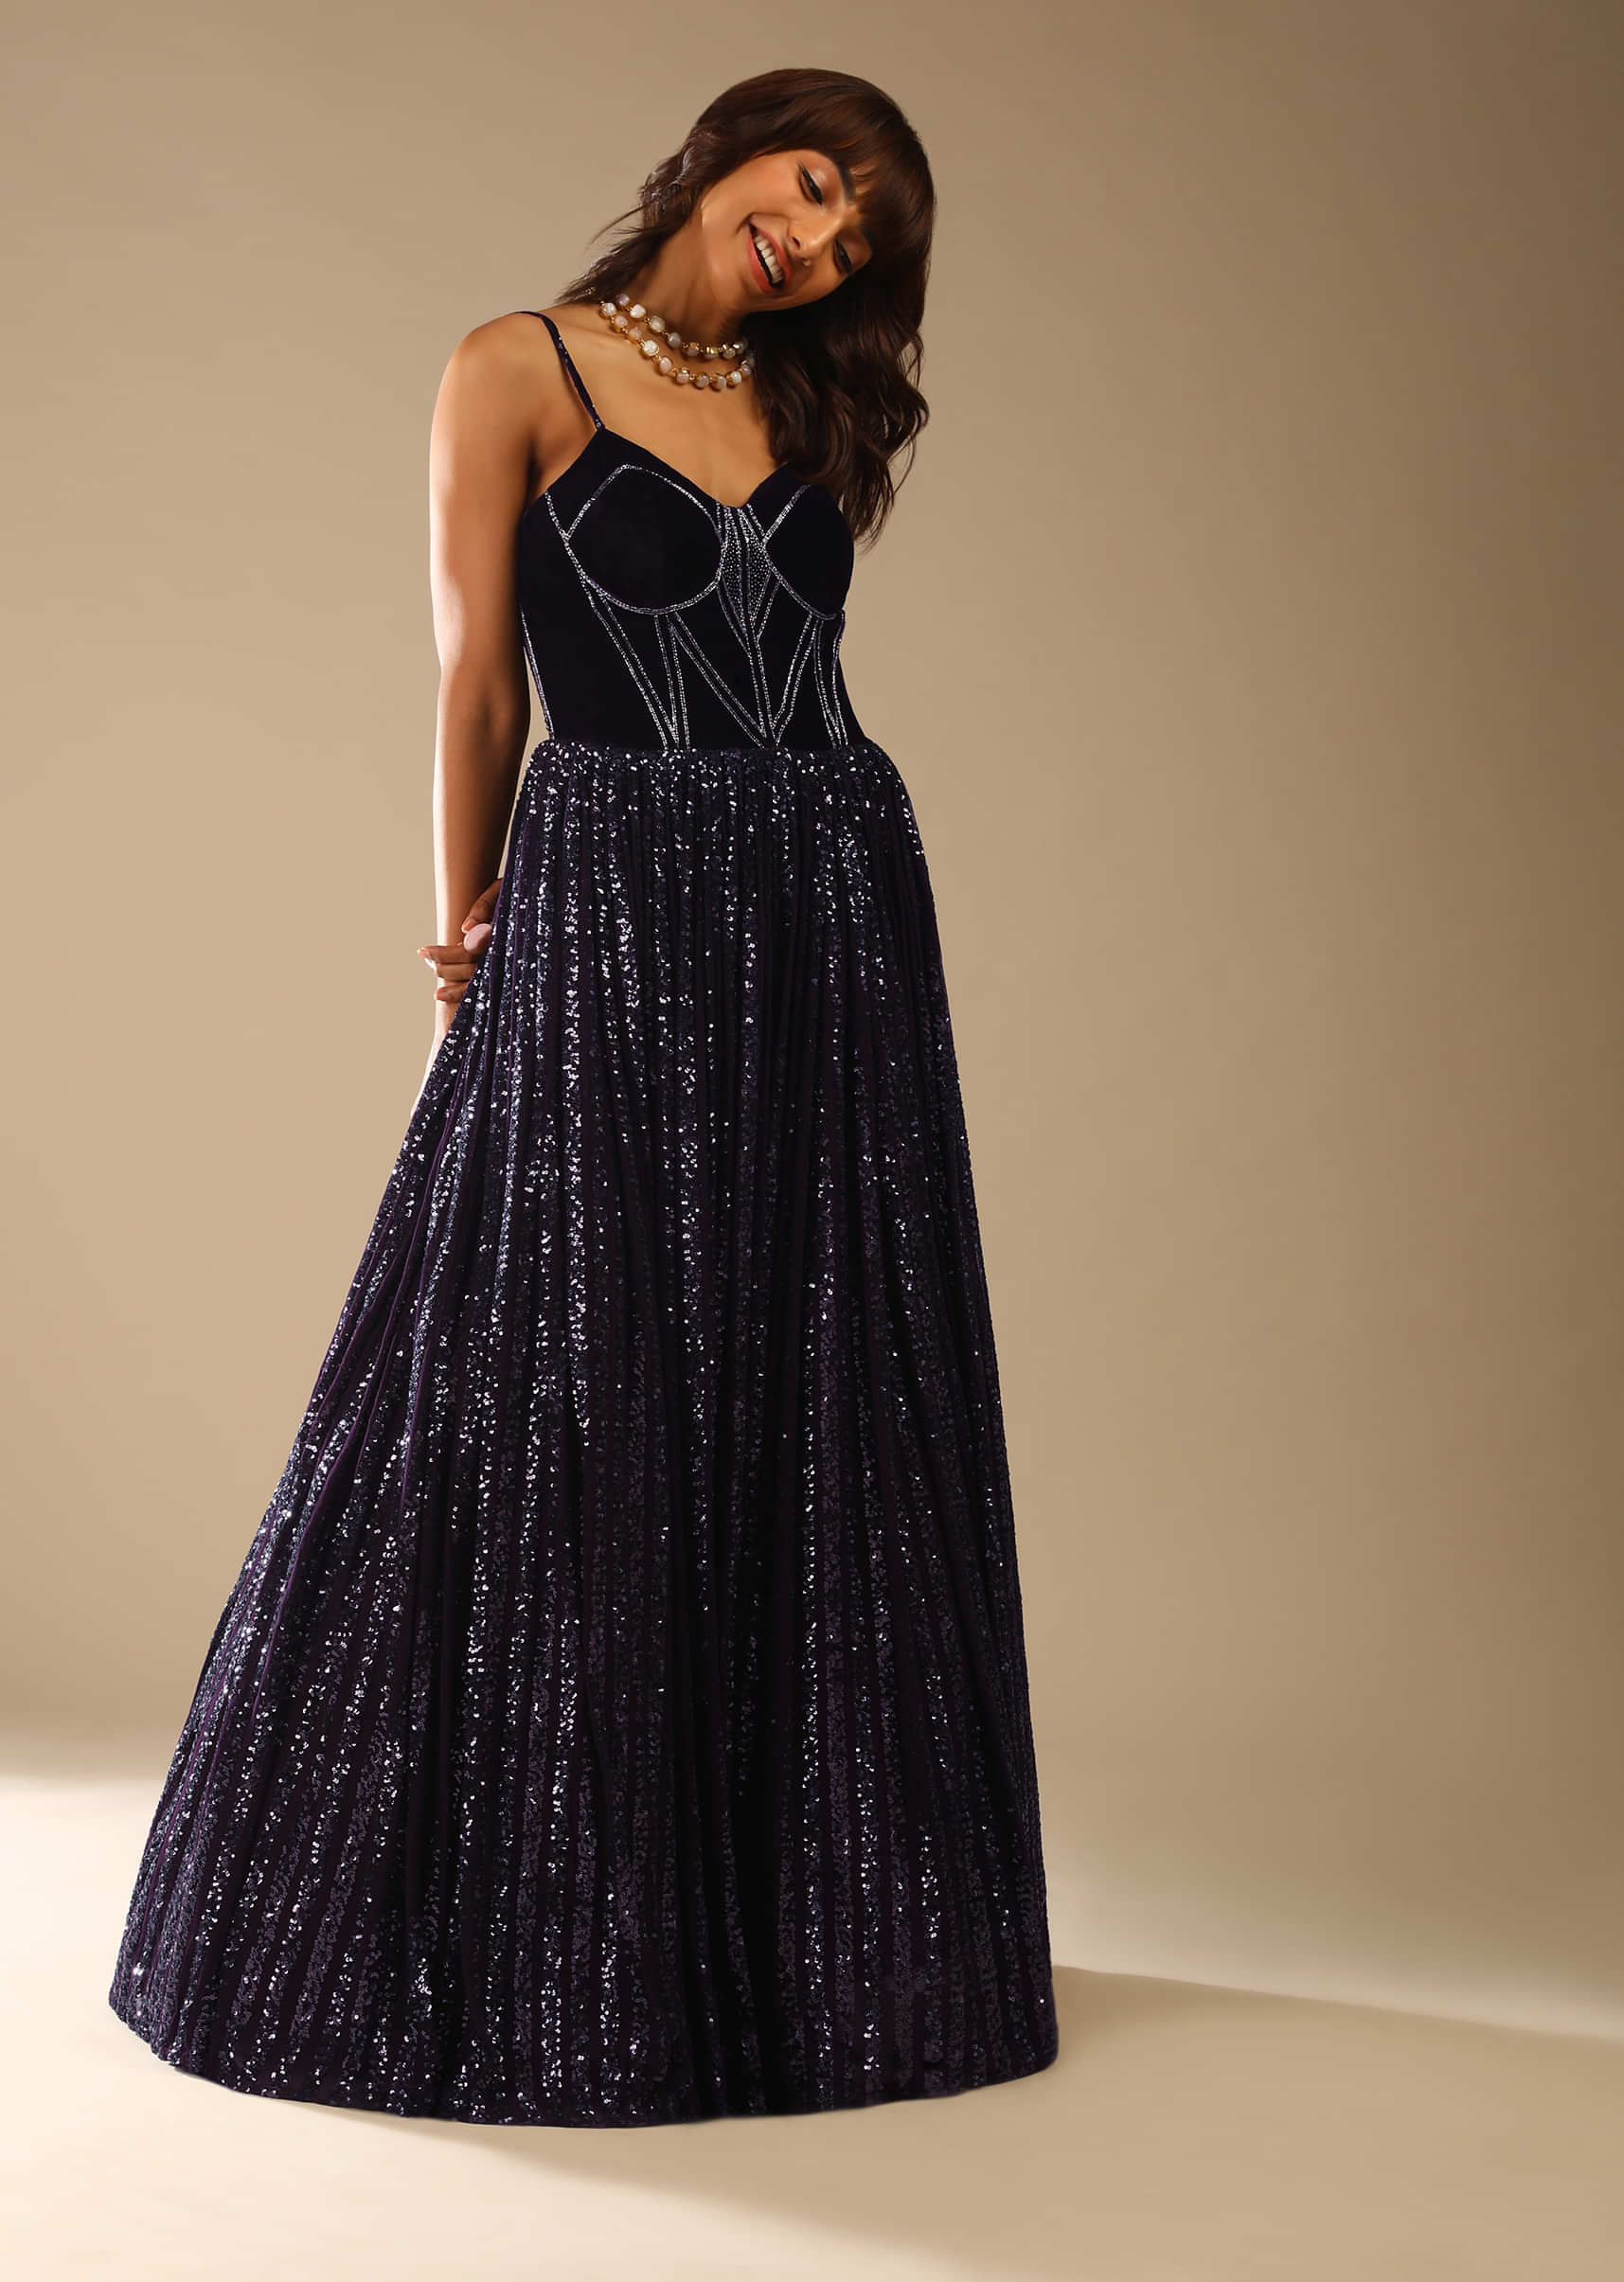 Wine Purple Corset Gown Embellished In Sequins With A Velvet Bodice Featuring Edgy Cut Dana Work